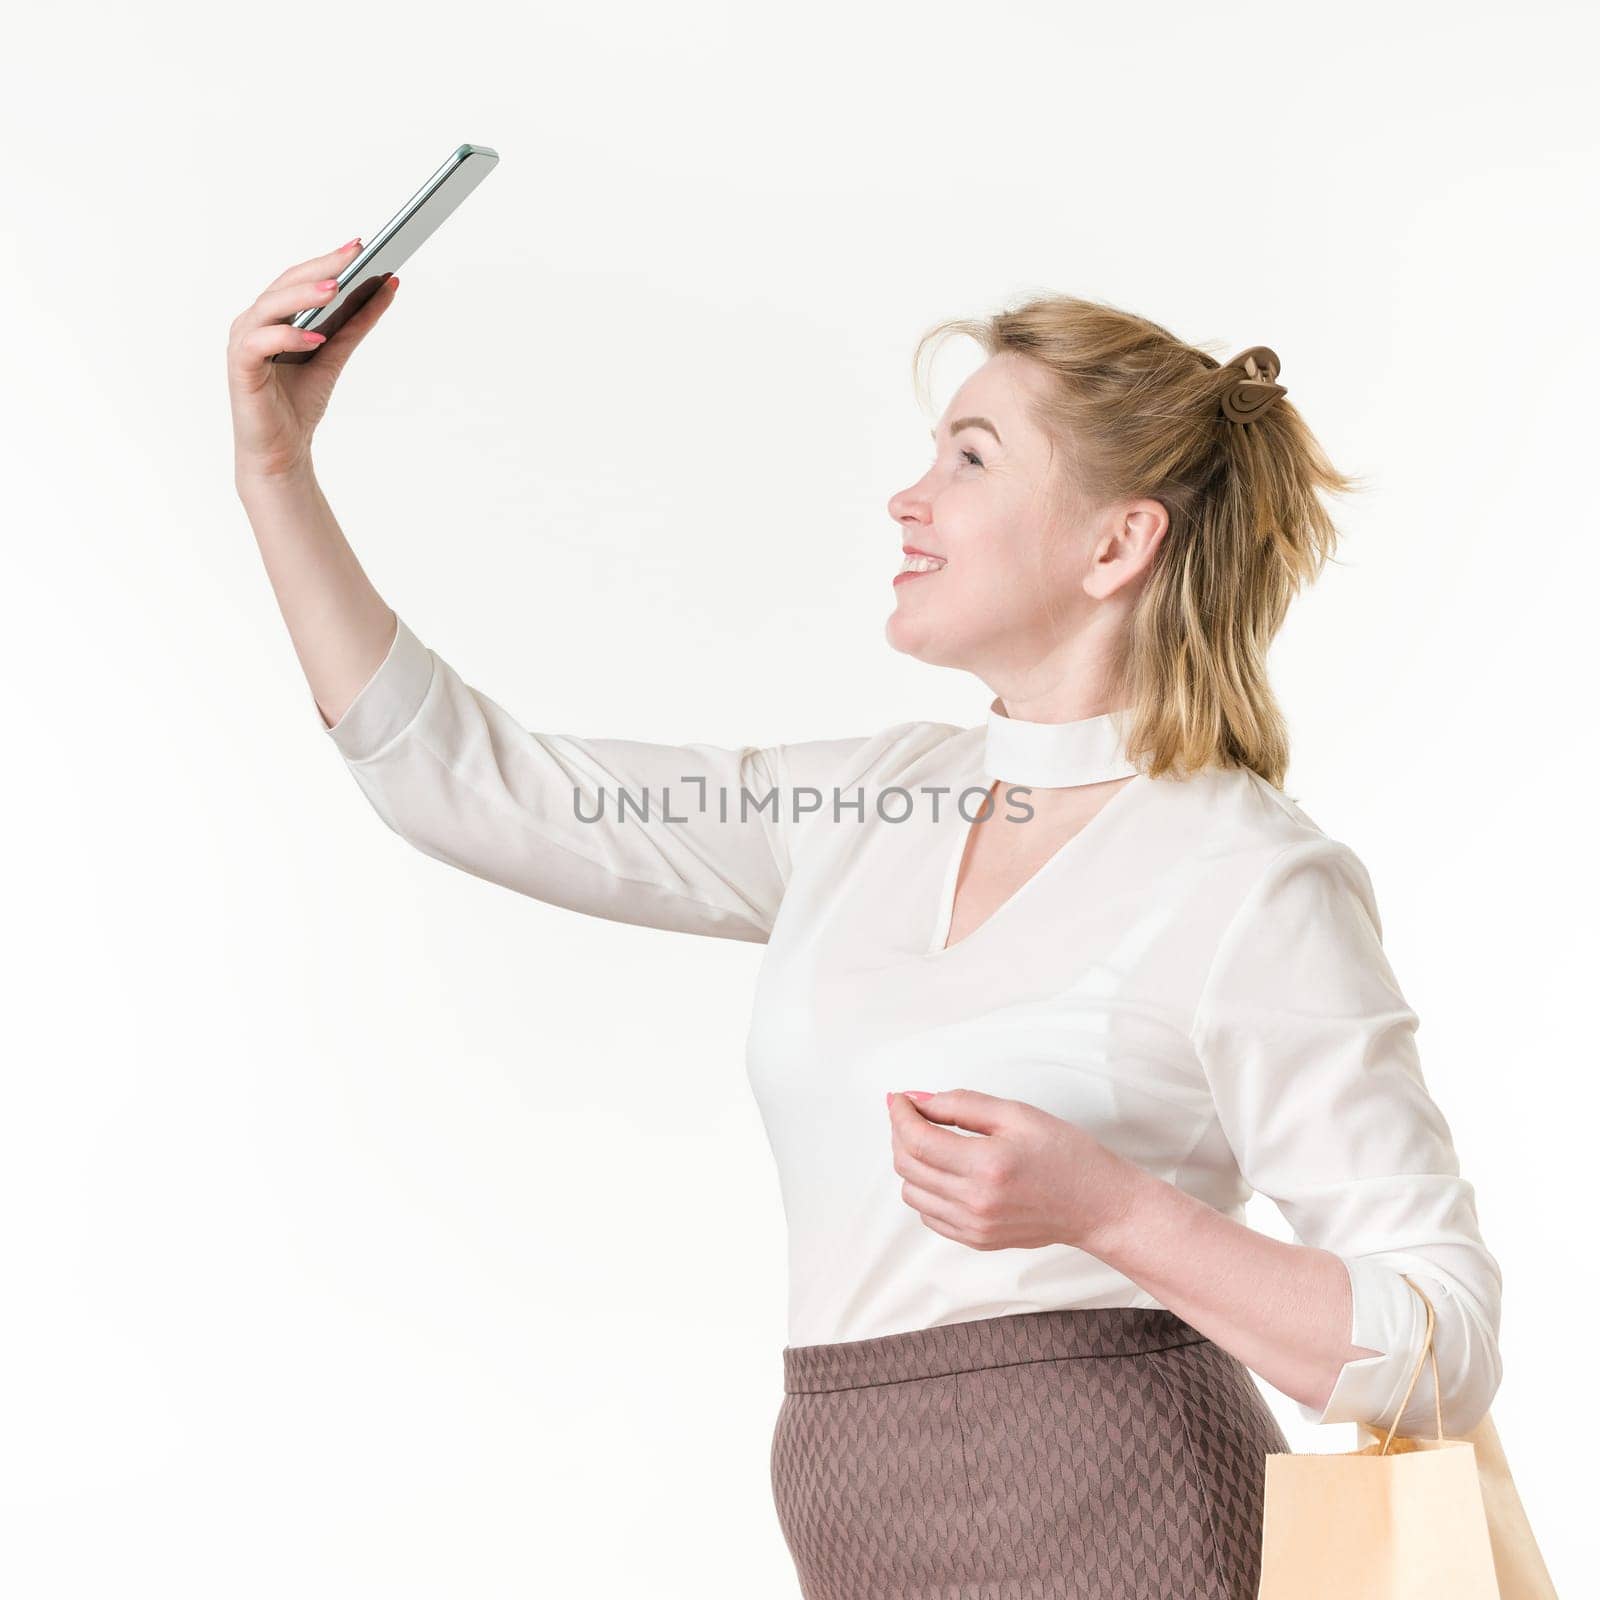 Caucasian ethnicity woman taking selfie holding phone up high, holding shopping bags with purchases by Alexander-Piragis